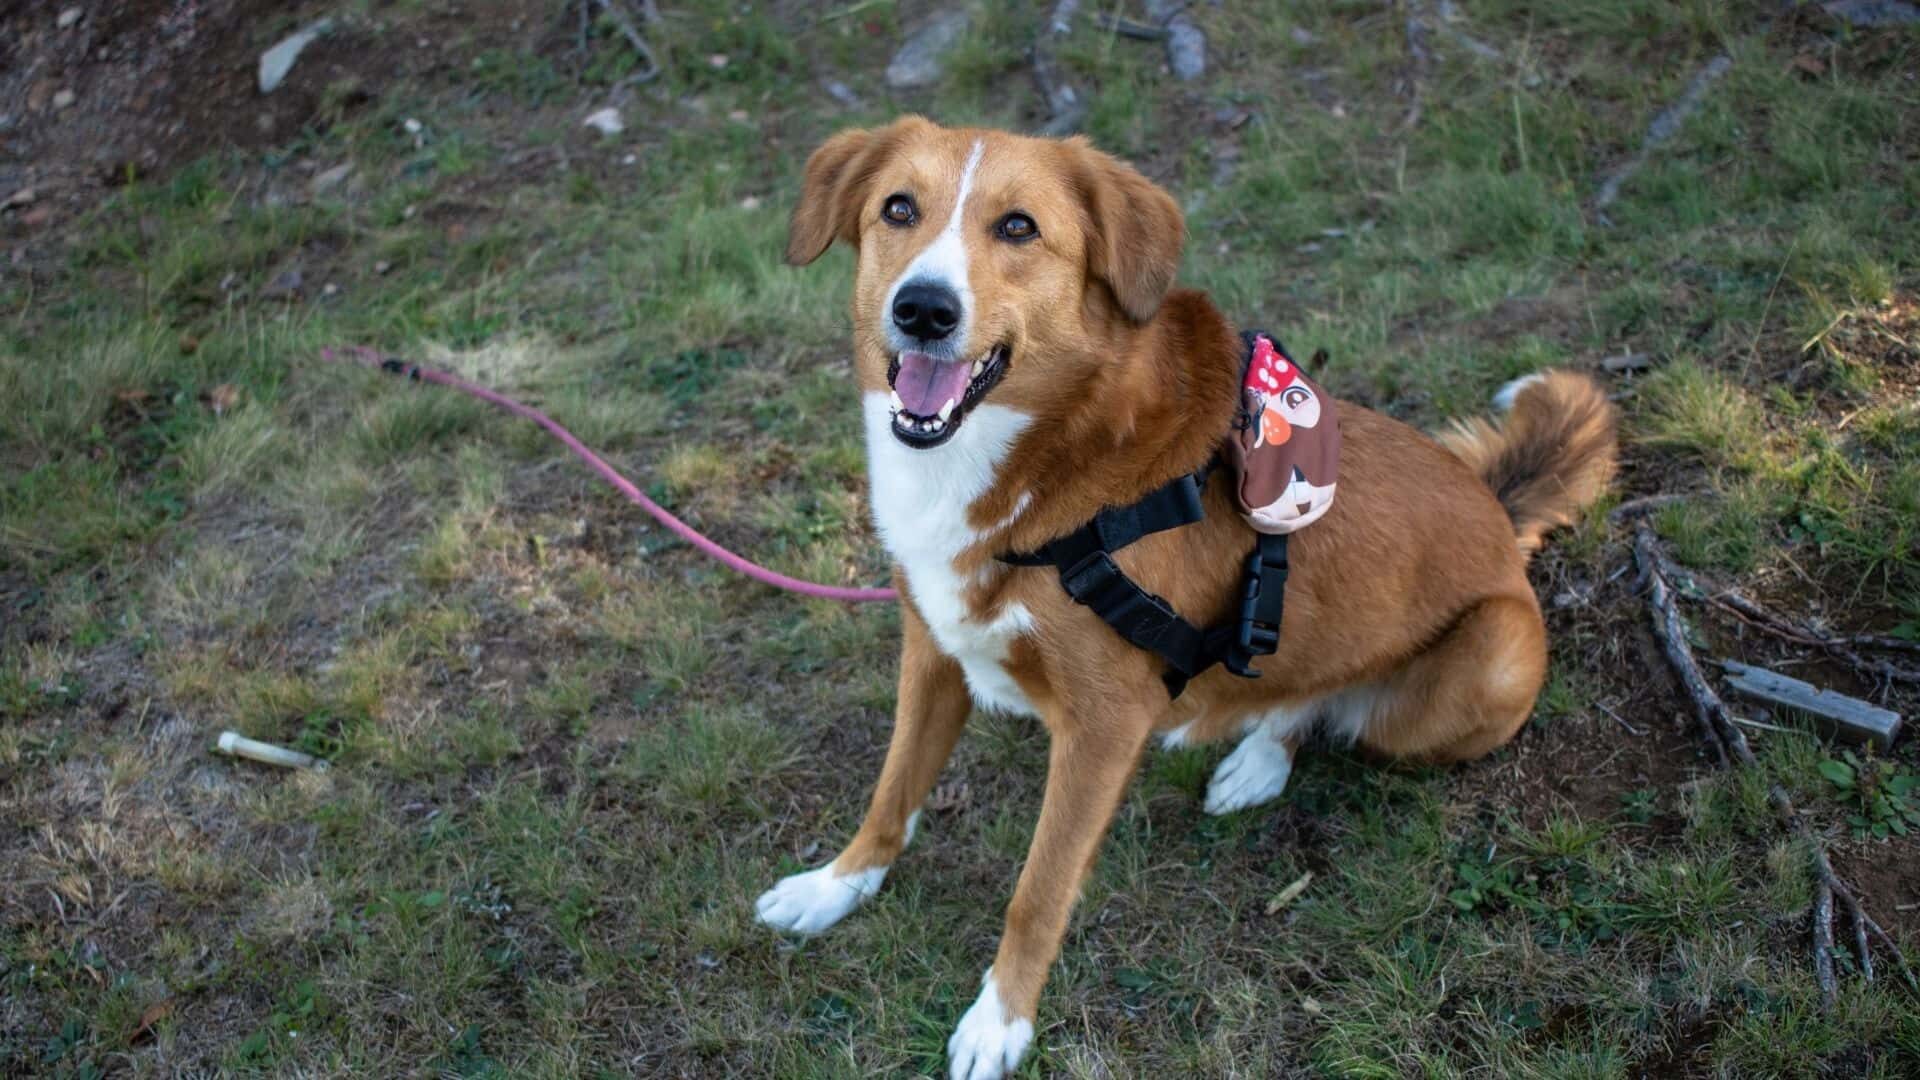 How to put harness on a dog?